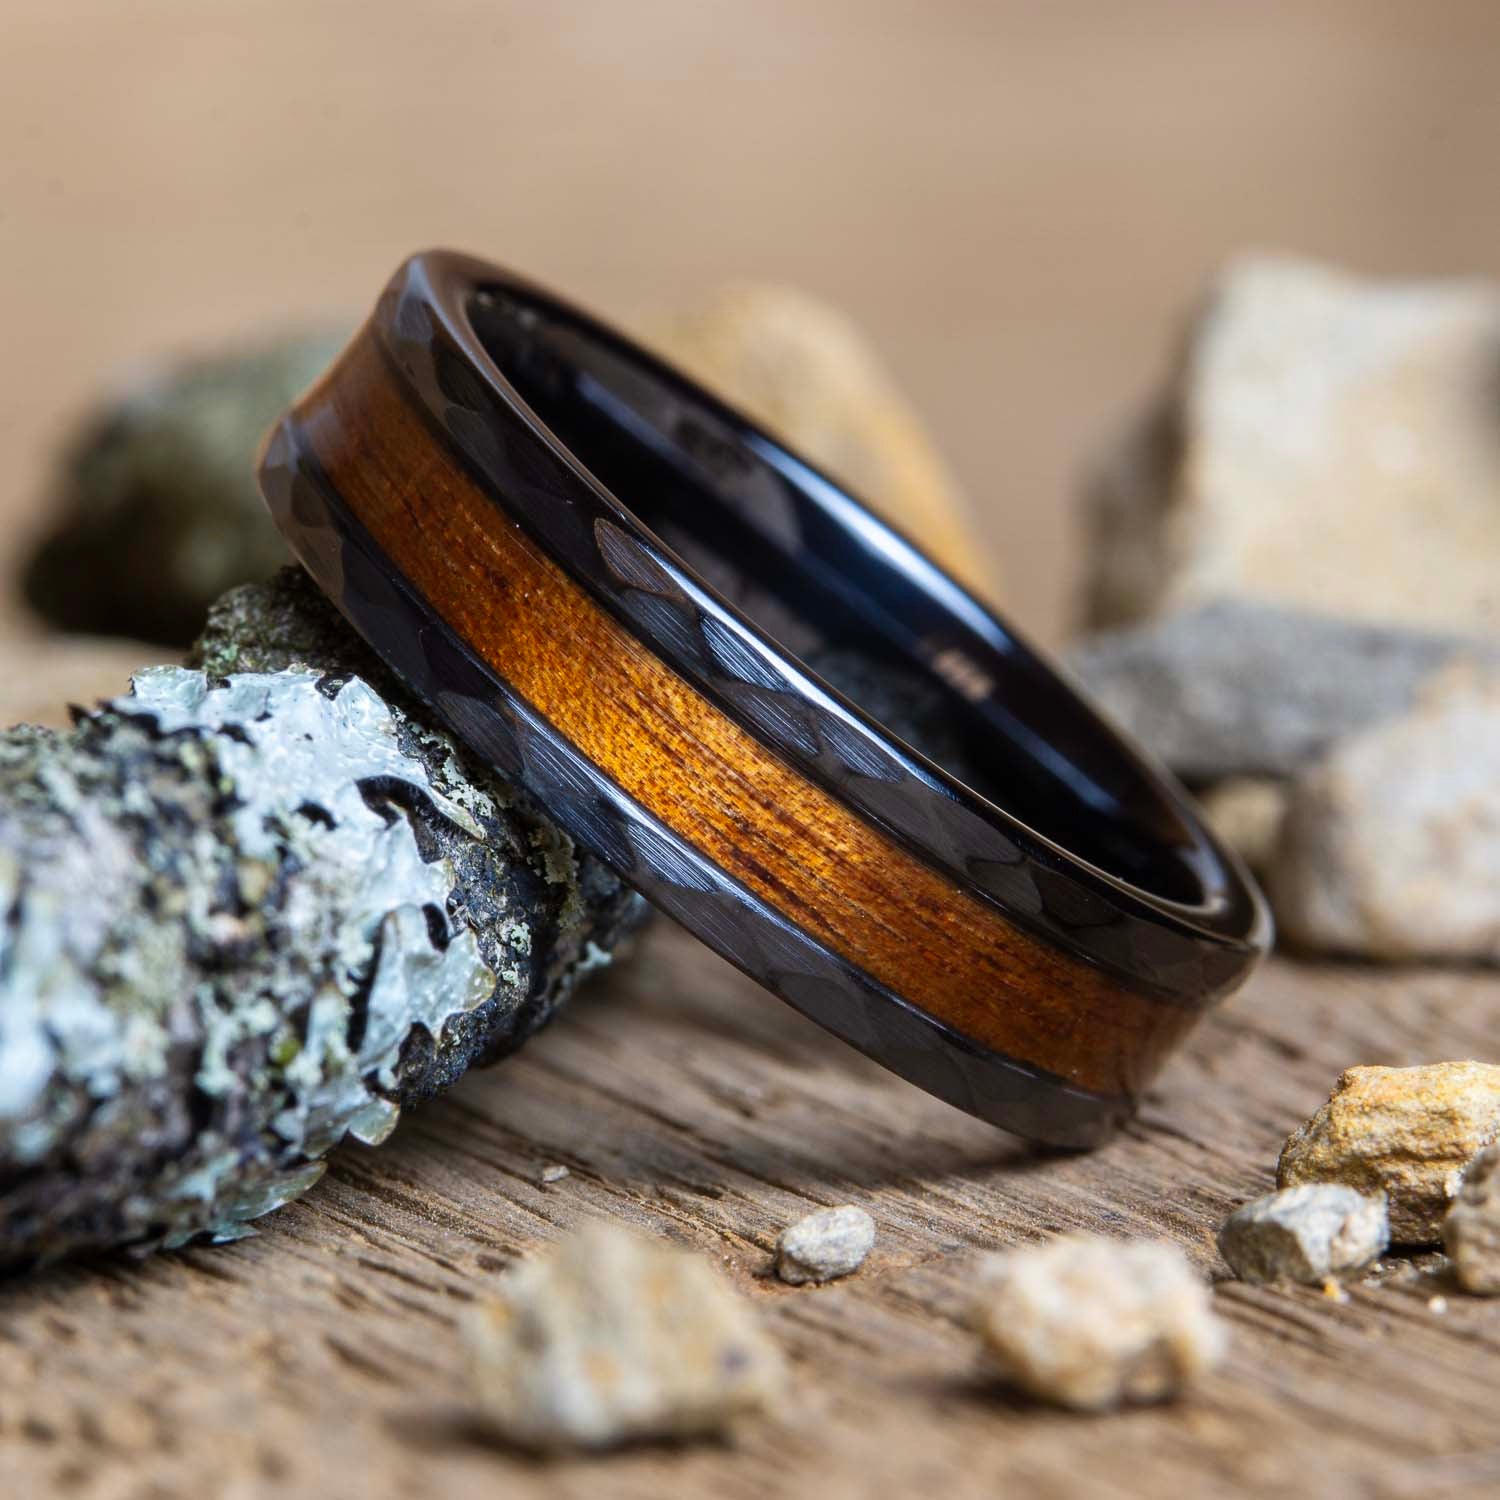 "Golden hammer" Hammered ring with Koa wood inlay